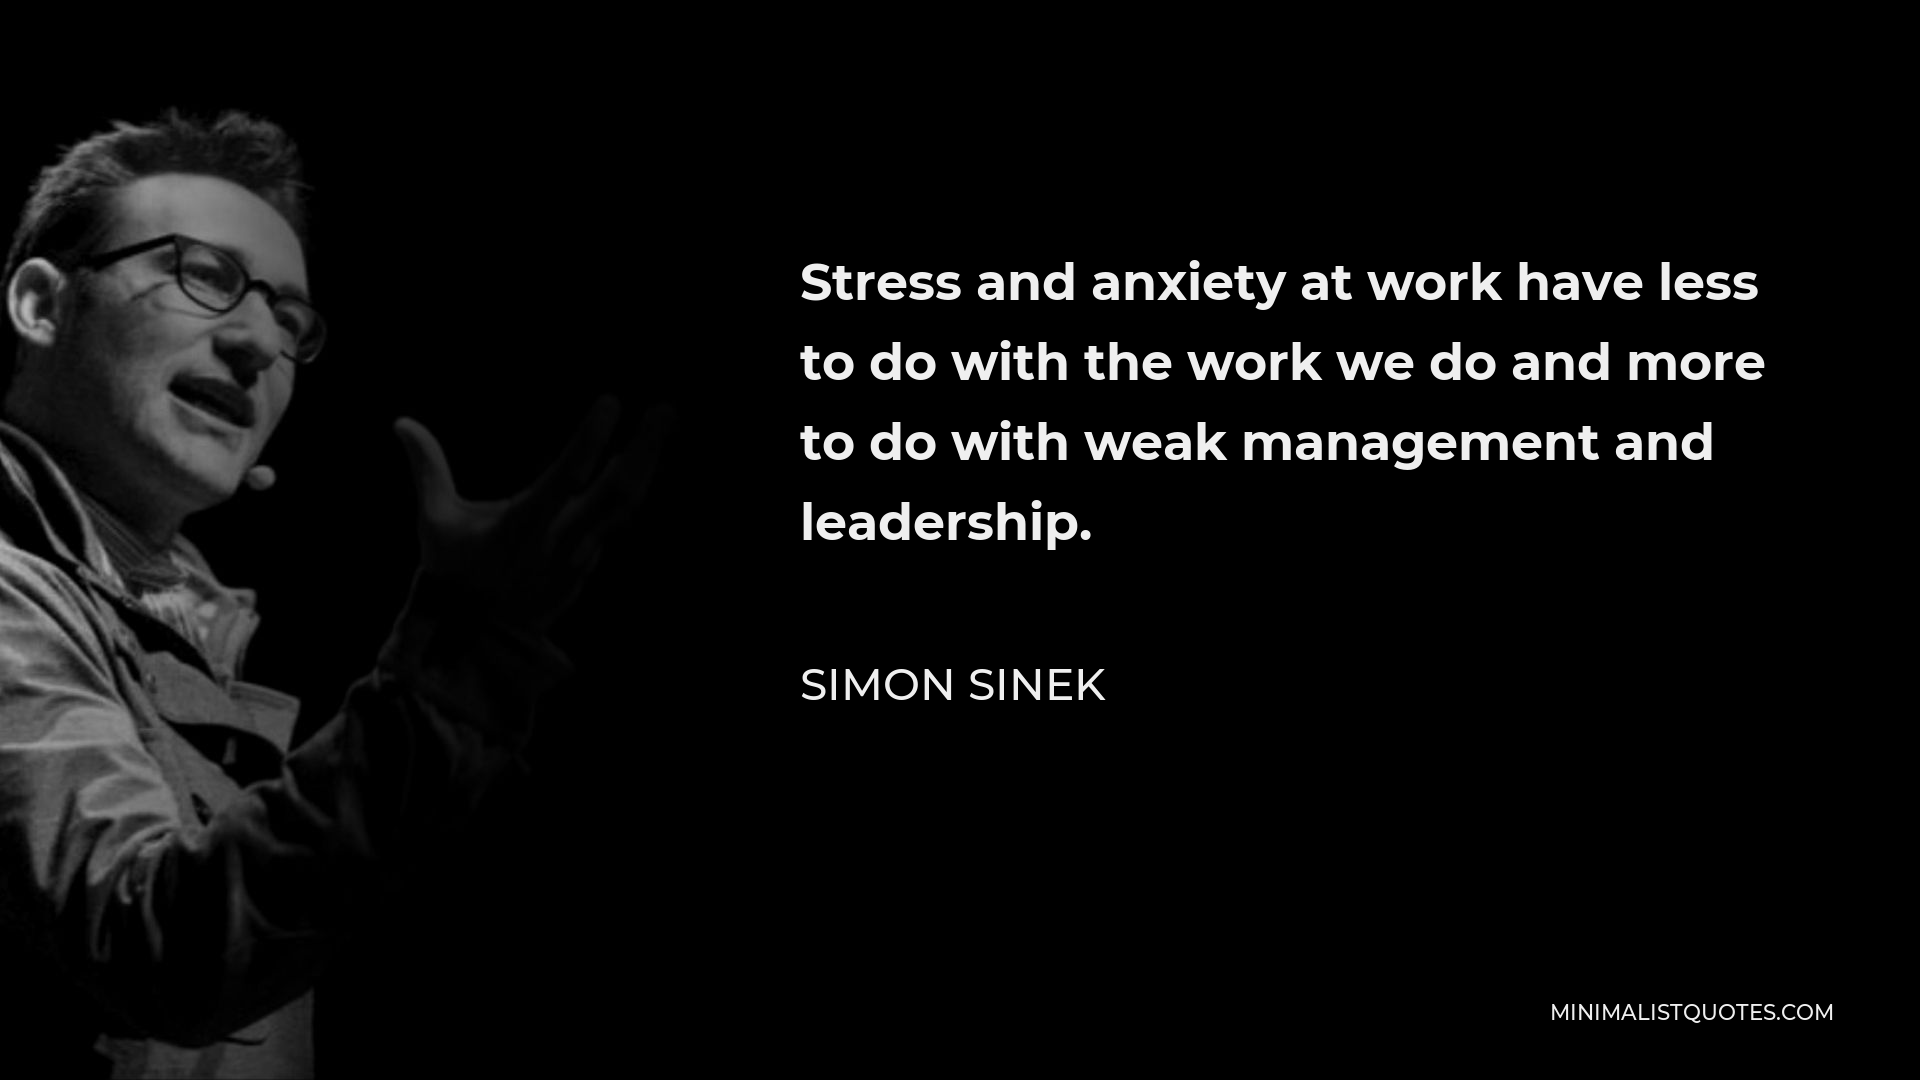 Simon Sinek Quote - Stress and anxiety at work have less to do with the work we do and more to do with weak management and leadership.